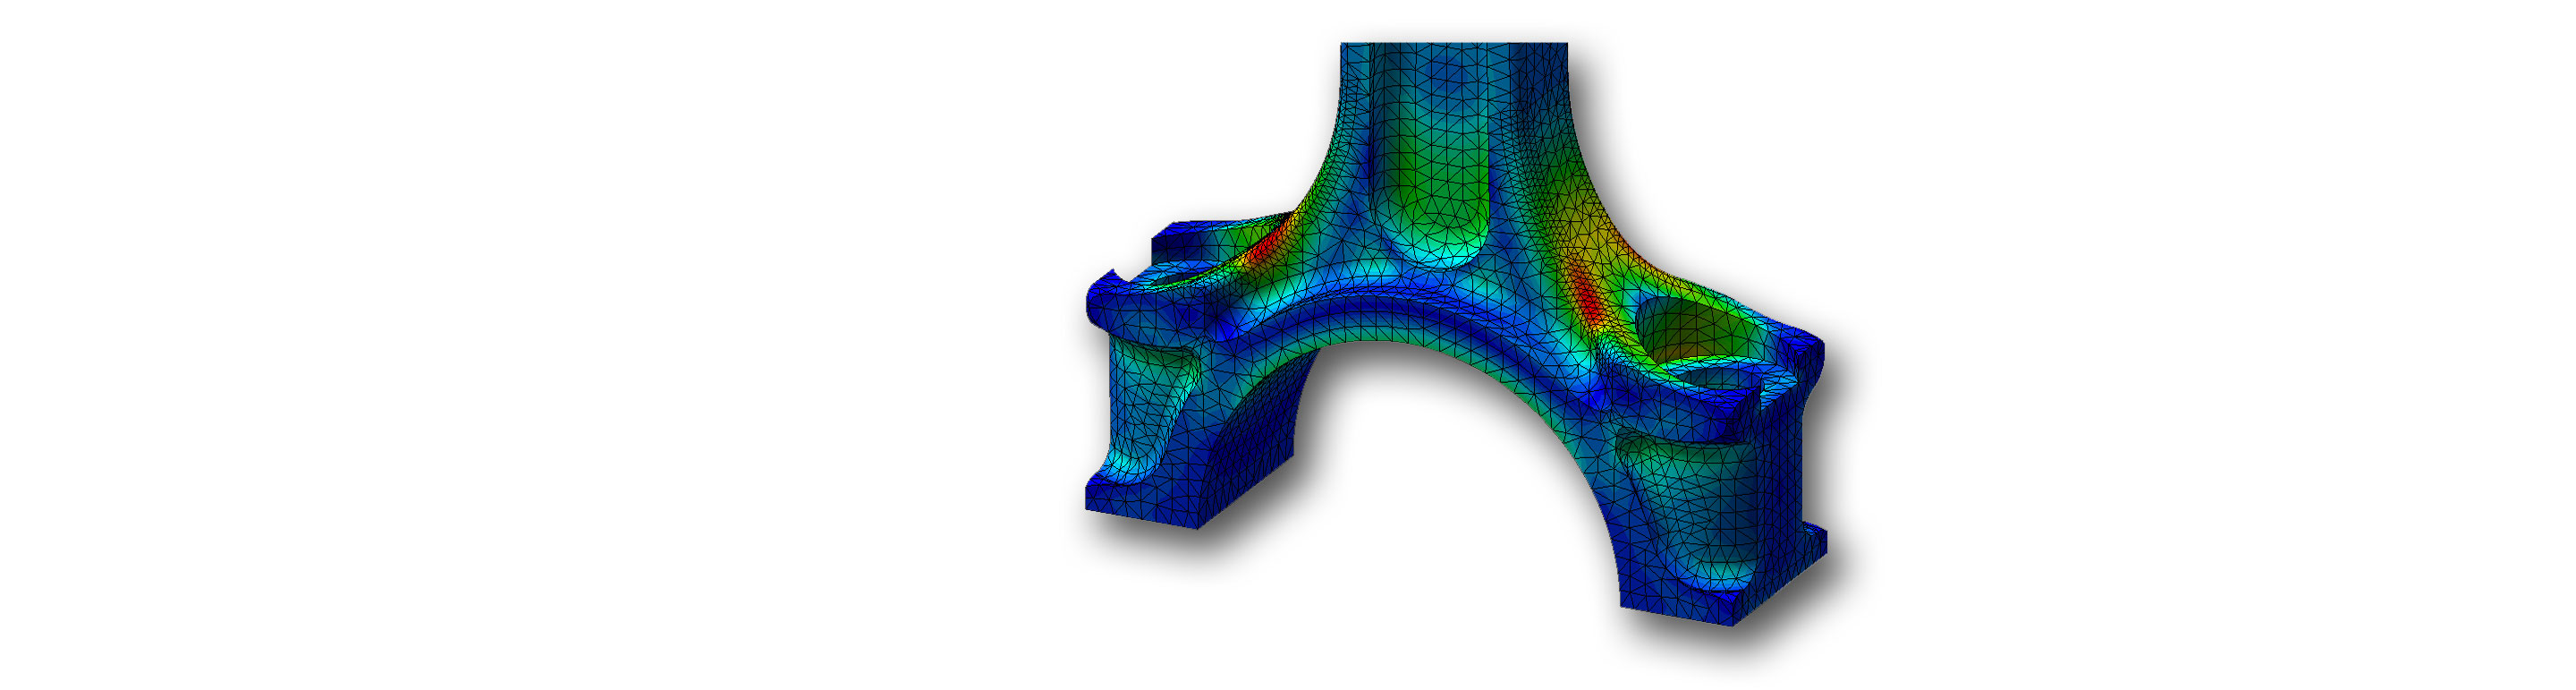 Connecting Rod Stress Analysis